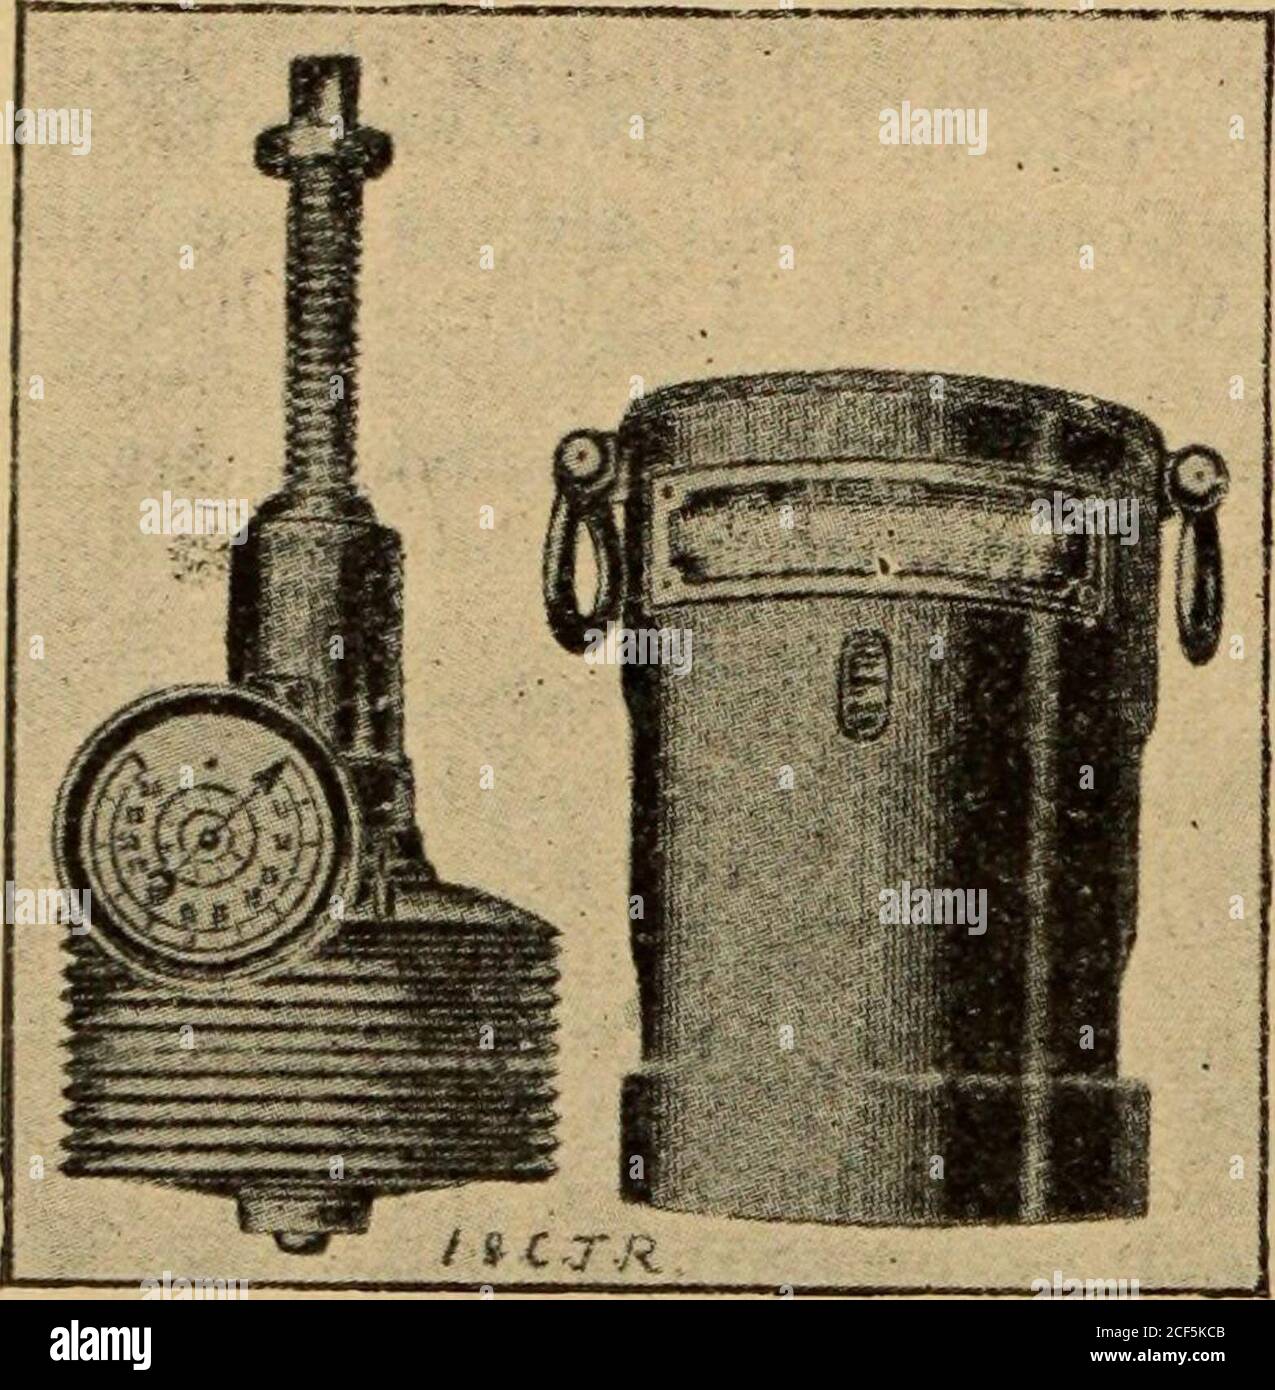 . The Iron and steel magazine. smiths etc., for testing the hardness of coppercollectors and other fittings. The pressure is recorded on thedial shown in the head of the press, and the ball has a maximumstroke of 2 inches. A larger form of the same press is made for testing objects of greater thick-ness, in which the stroke of theball is 6 inches, the actual heightabove the base plate being ad-justed up to 14 inches, accord-ing to the thickness of the testpiece, by wheels and locking nutson threaded pillars at either sideof the frame. Figs. 2 and 3 show the new-est pattern for working with hig Stock Photo